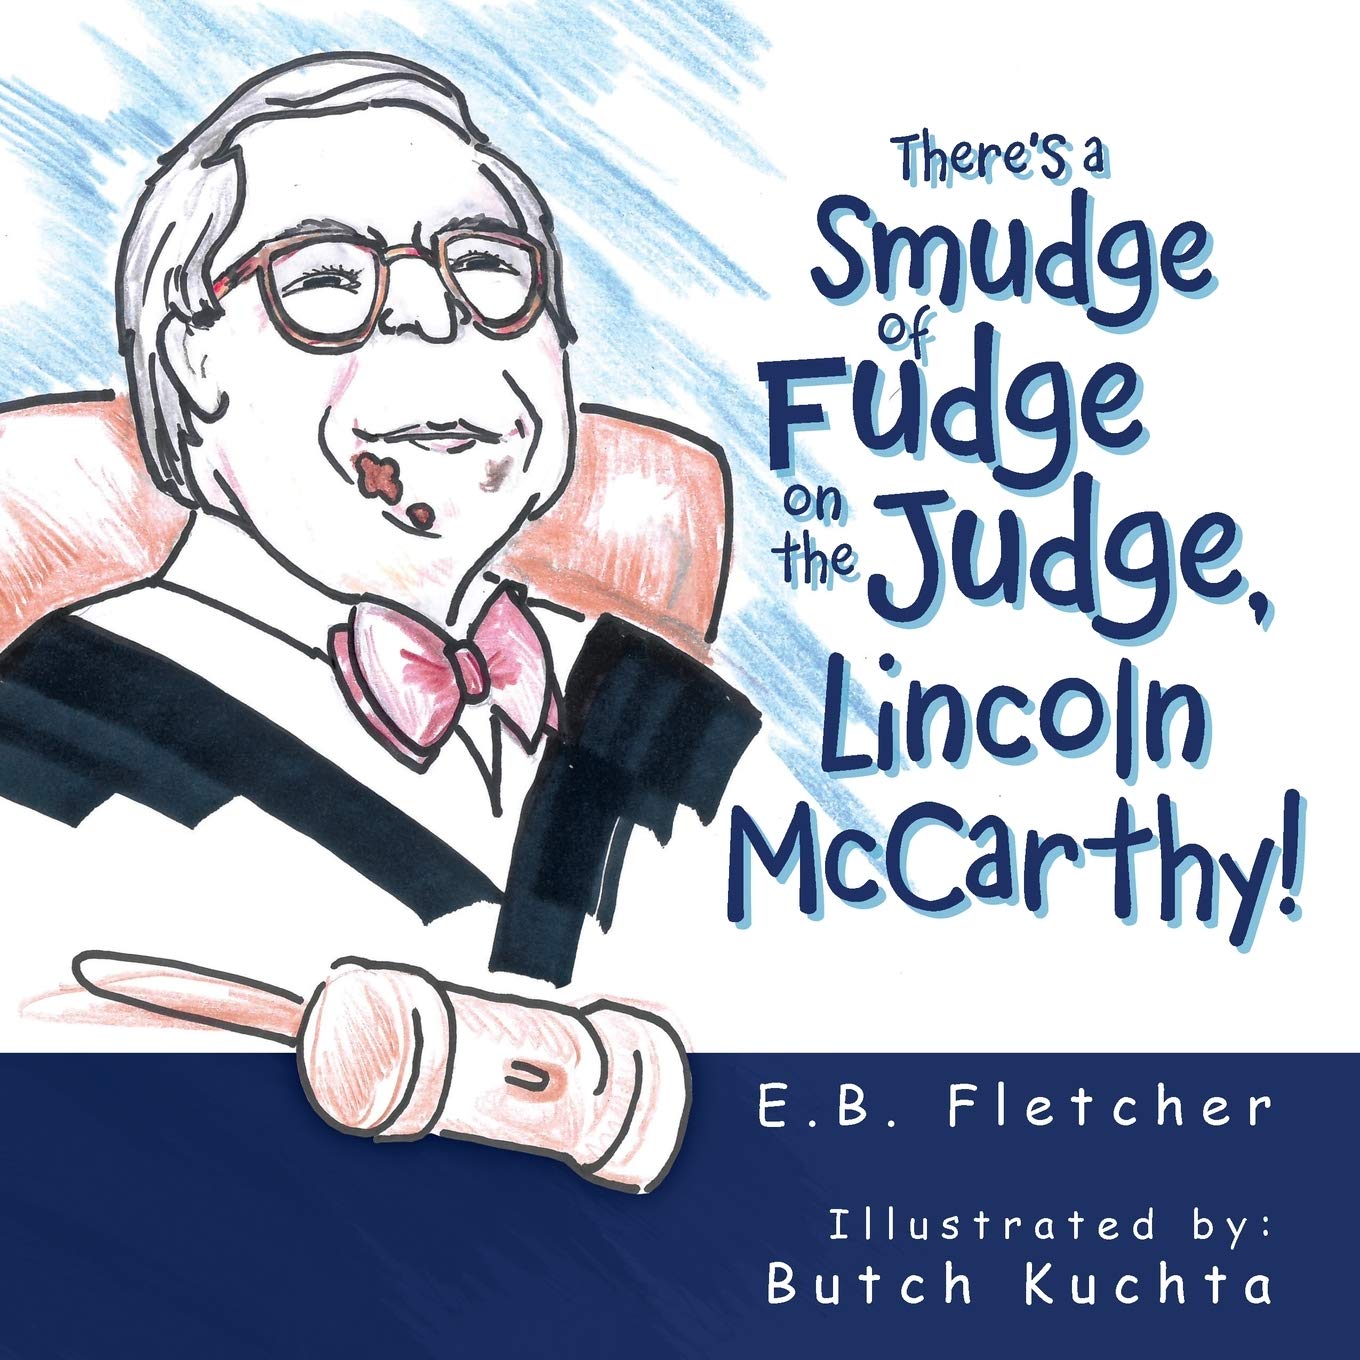 E.B. Fletcher Gets Support from Author’s Tranquility Press with There’s a Smudge of Fudge on the Judge, Lincoln McCarthy!